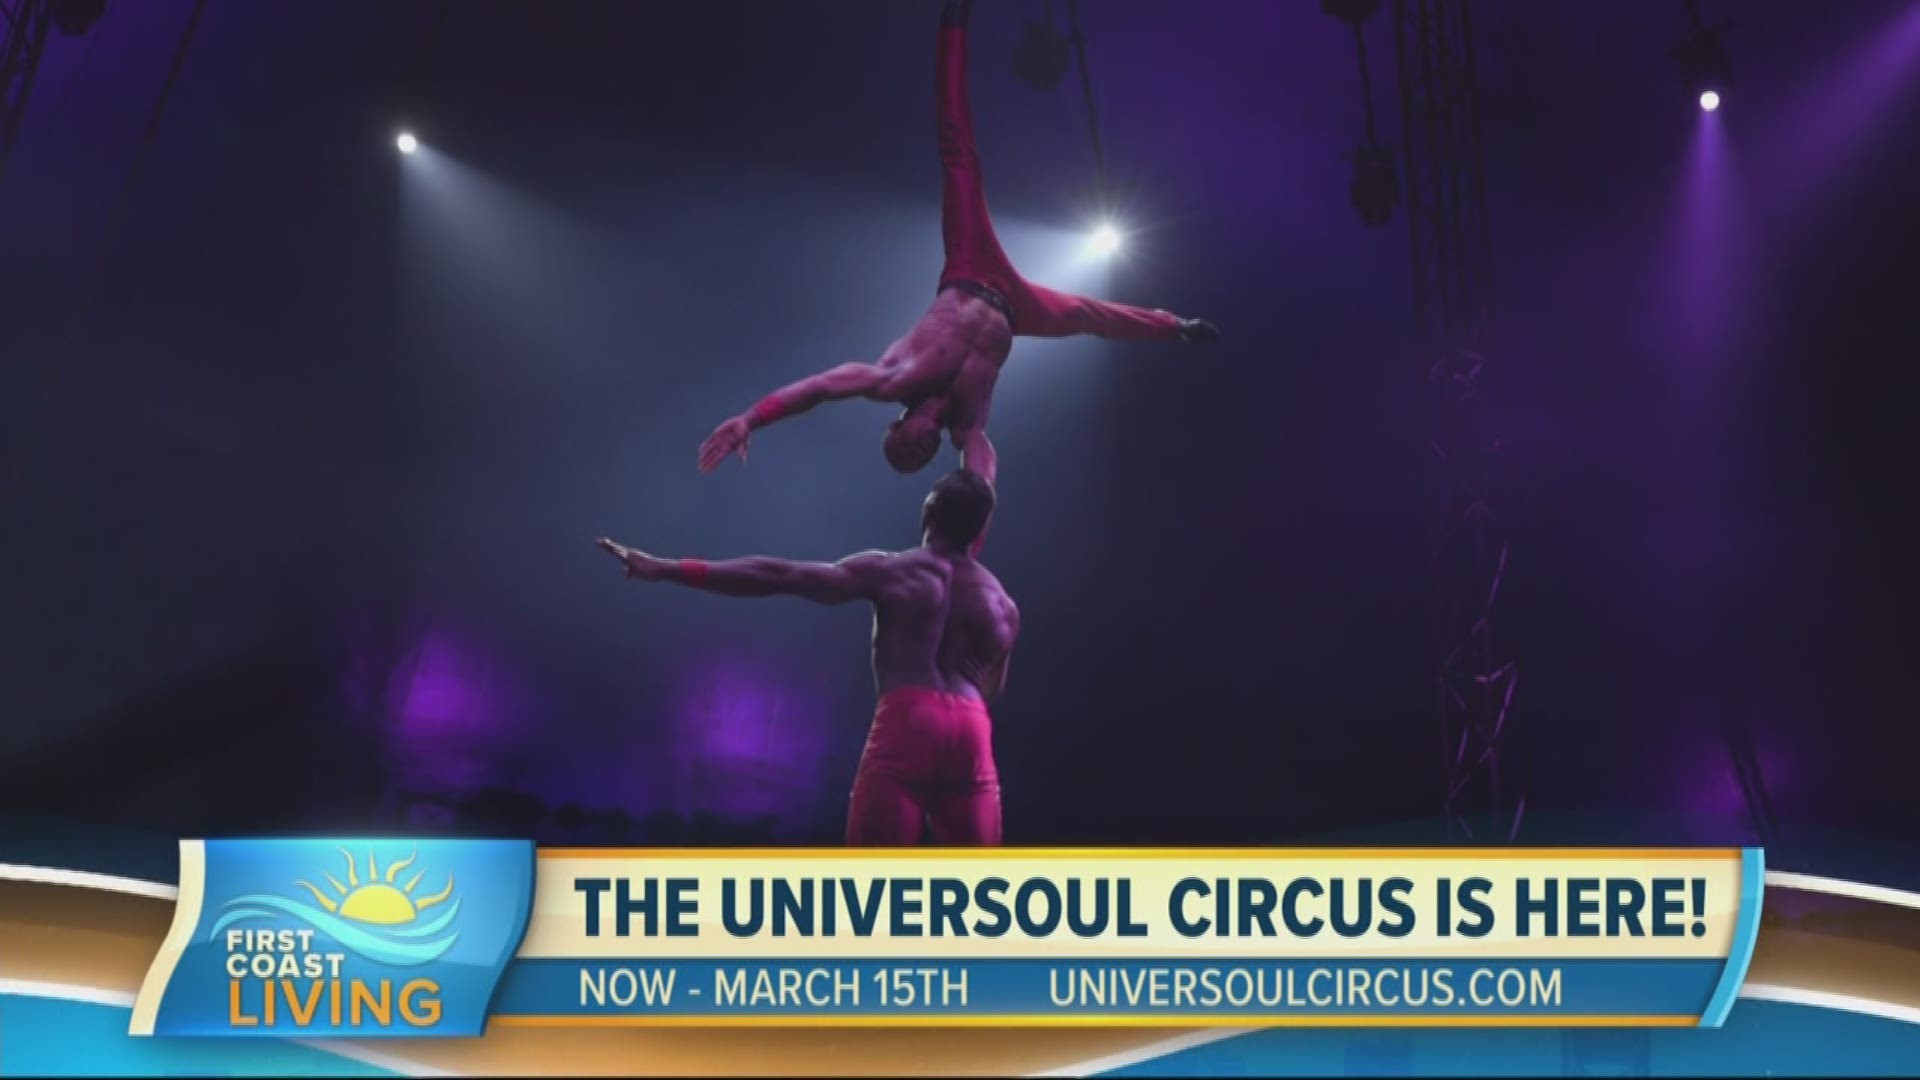 Last weekend to catch UniverSoul Circus in action in Jacksonville (FCL